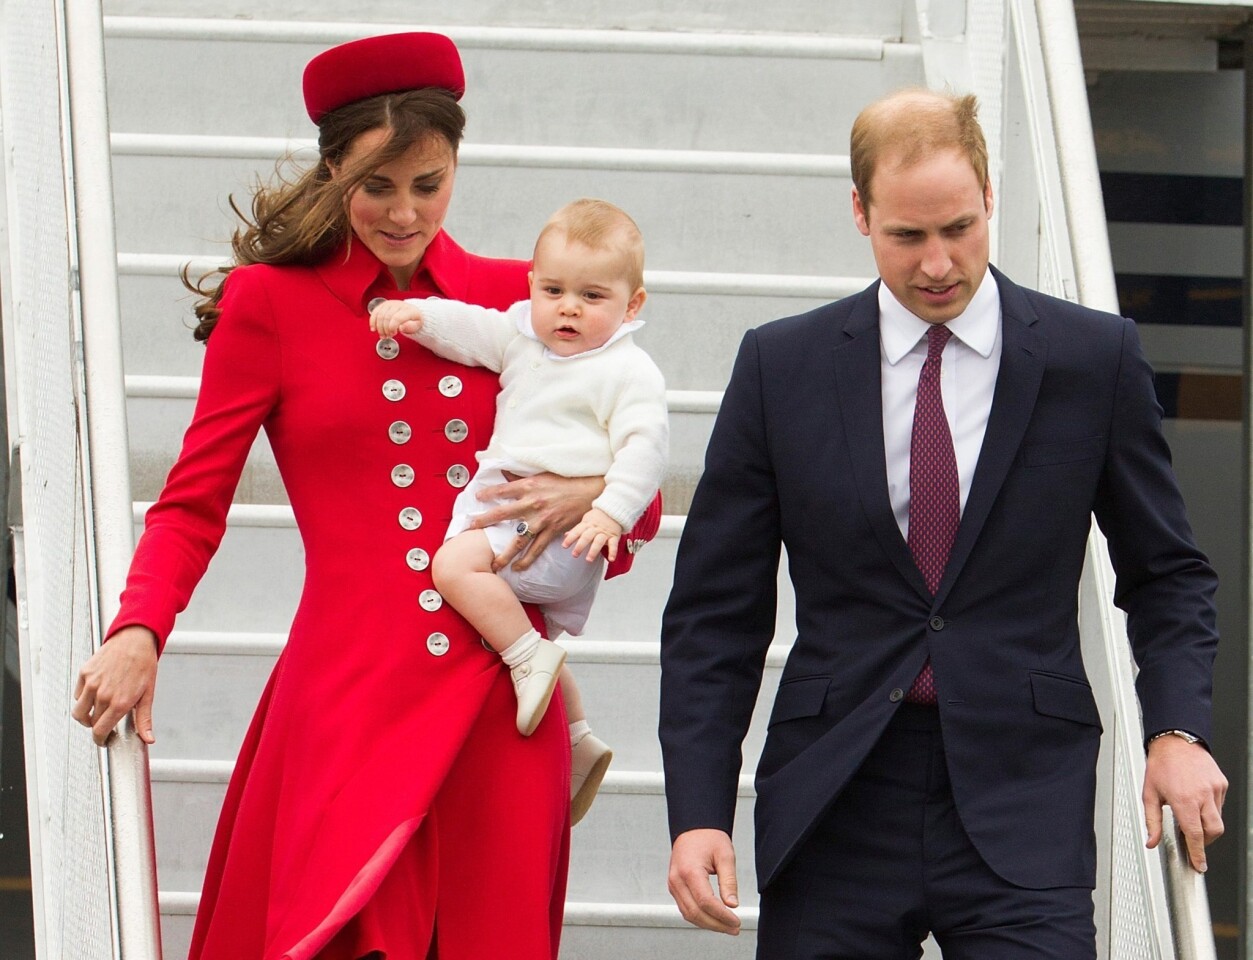 Prince William and Catherine arrive in Wellington, New Zealand, with their son Prince George. The family was scheduled to be New Zealand April 7-16. The duchess wears a scarlet Catherine Walker coat and a Gina Foster hat embellished with silver fern-shaped diamond and platinum brooch. The silver fern is New Zealand's emblem.